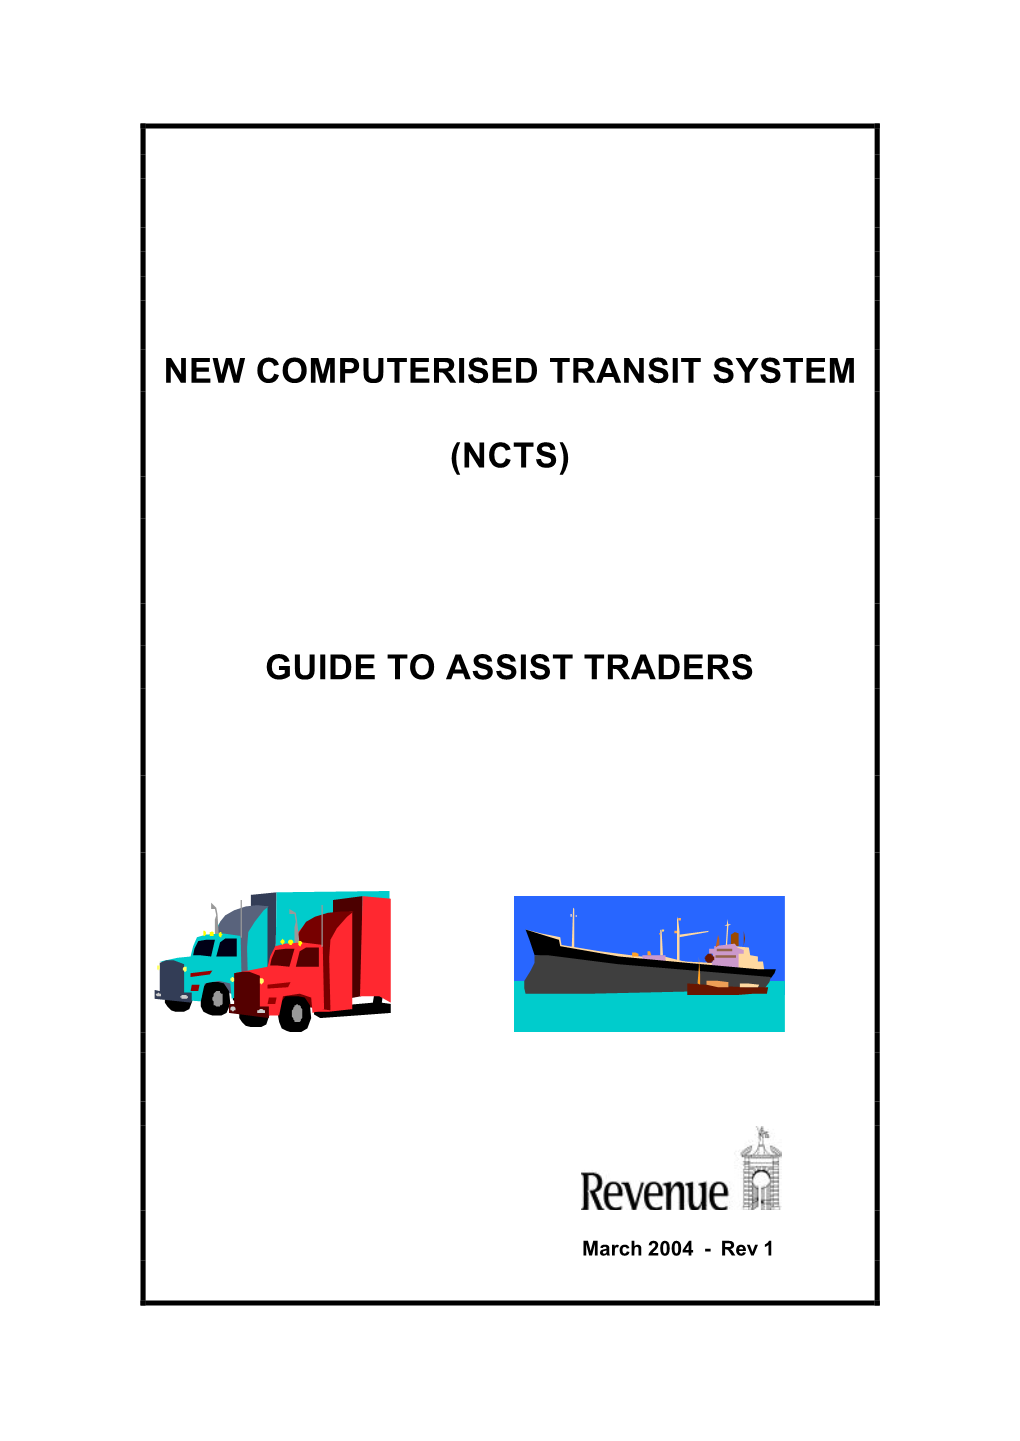 (Ncts) Guide to Assist Traders